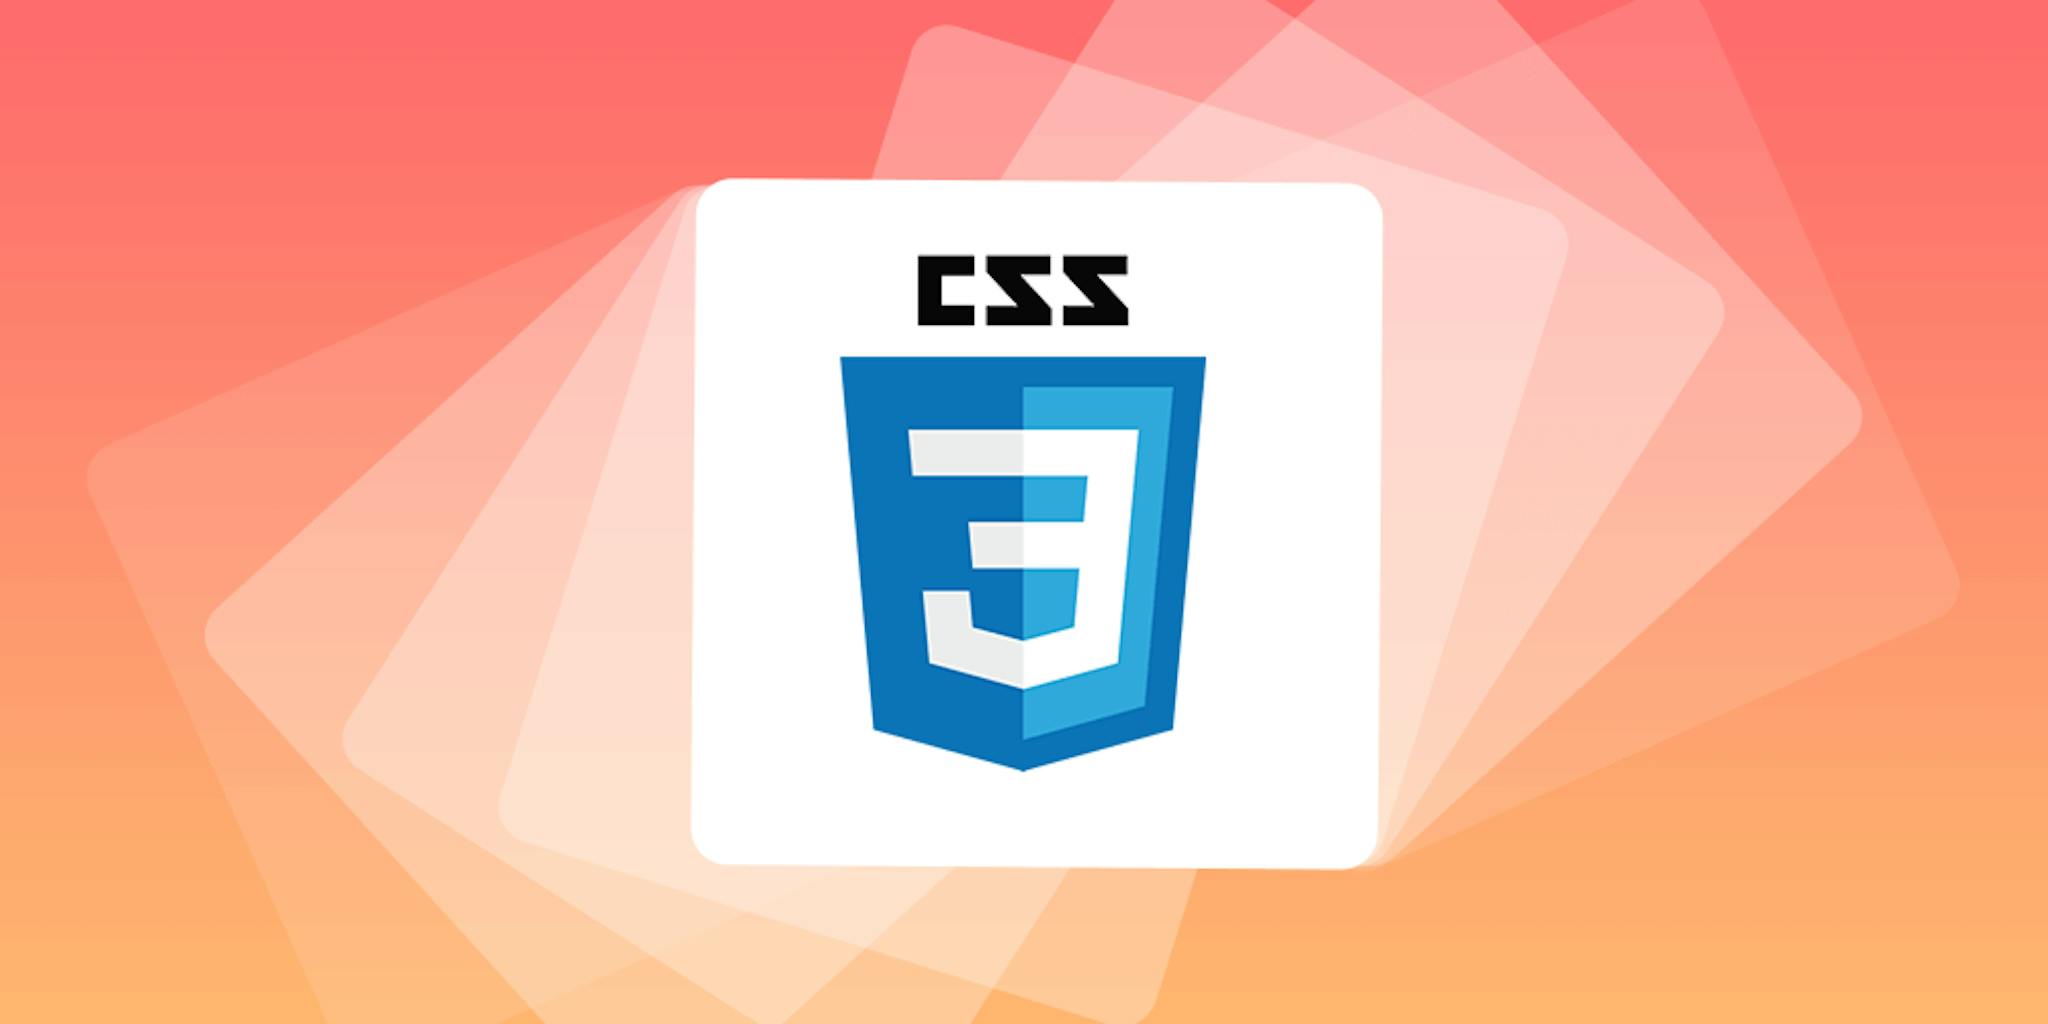 featured image - CSS3 Animation Step by Step Guide